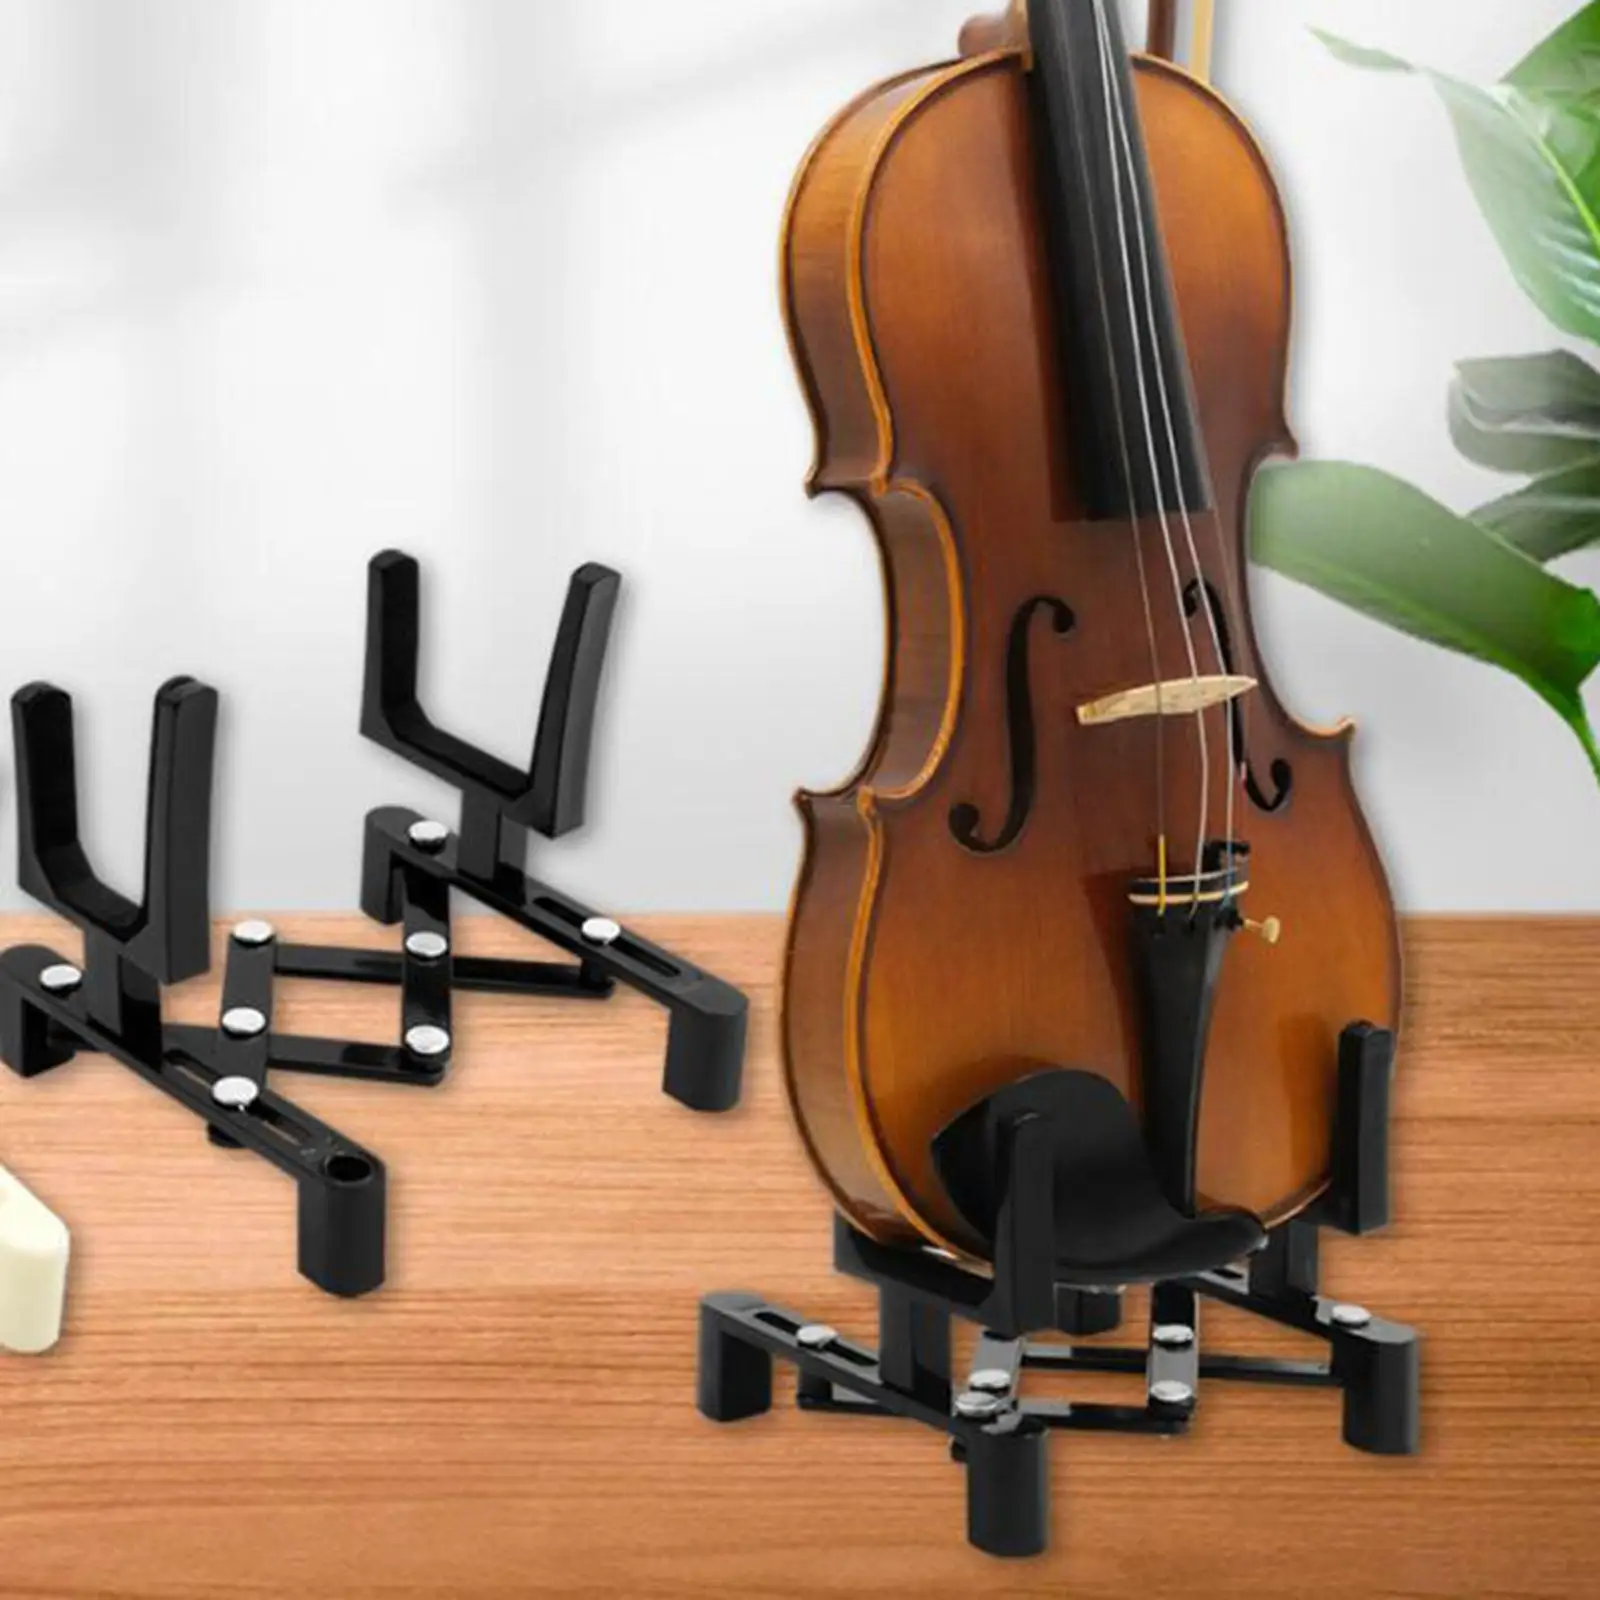 Folding Violin Holder Suppport Frame Lightweight Floor Stand Portable  Padded Anti Scratches Anti Slip for Most Violin